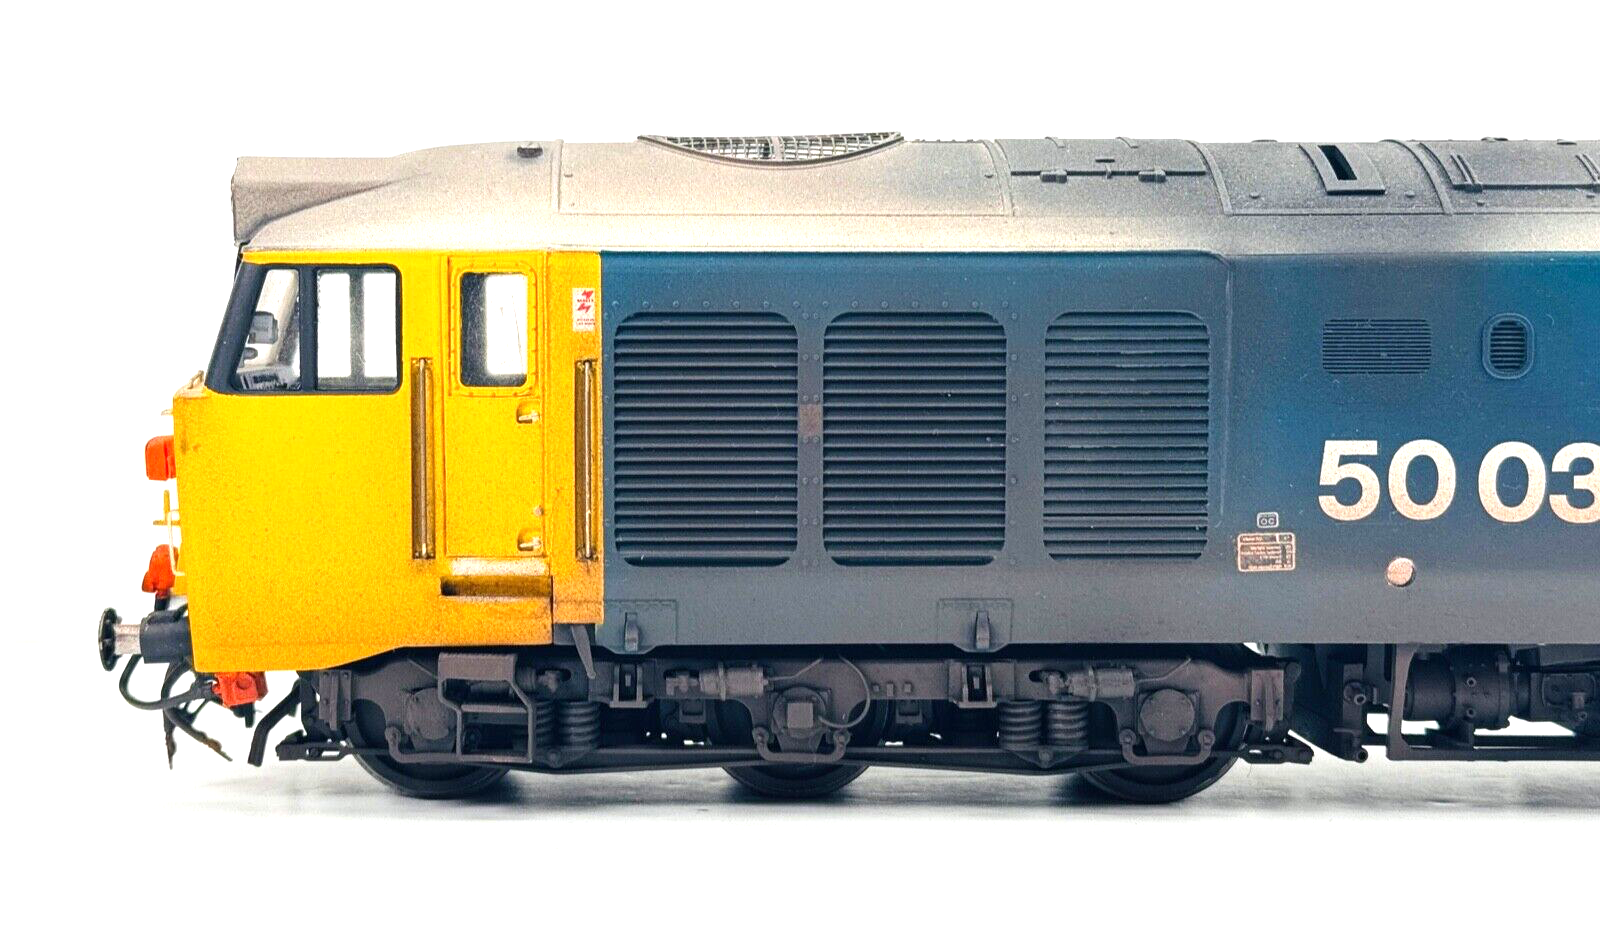 JUST LIKE THE REAL THING O GAUGE - CLASS 50 LARGE LOGO ARK ROYAL 50035 DCC SOUND